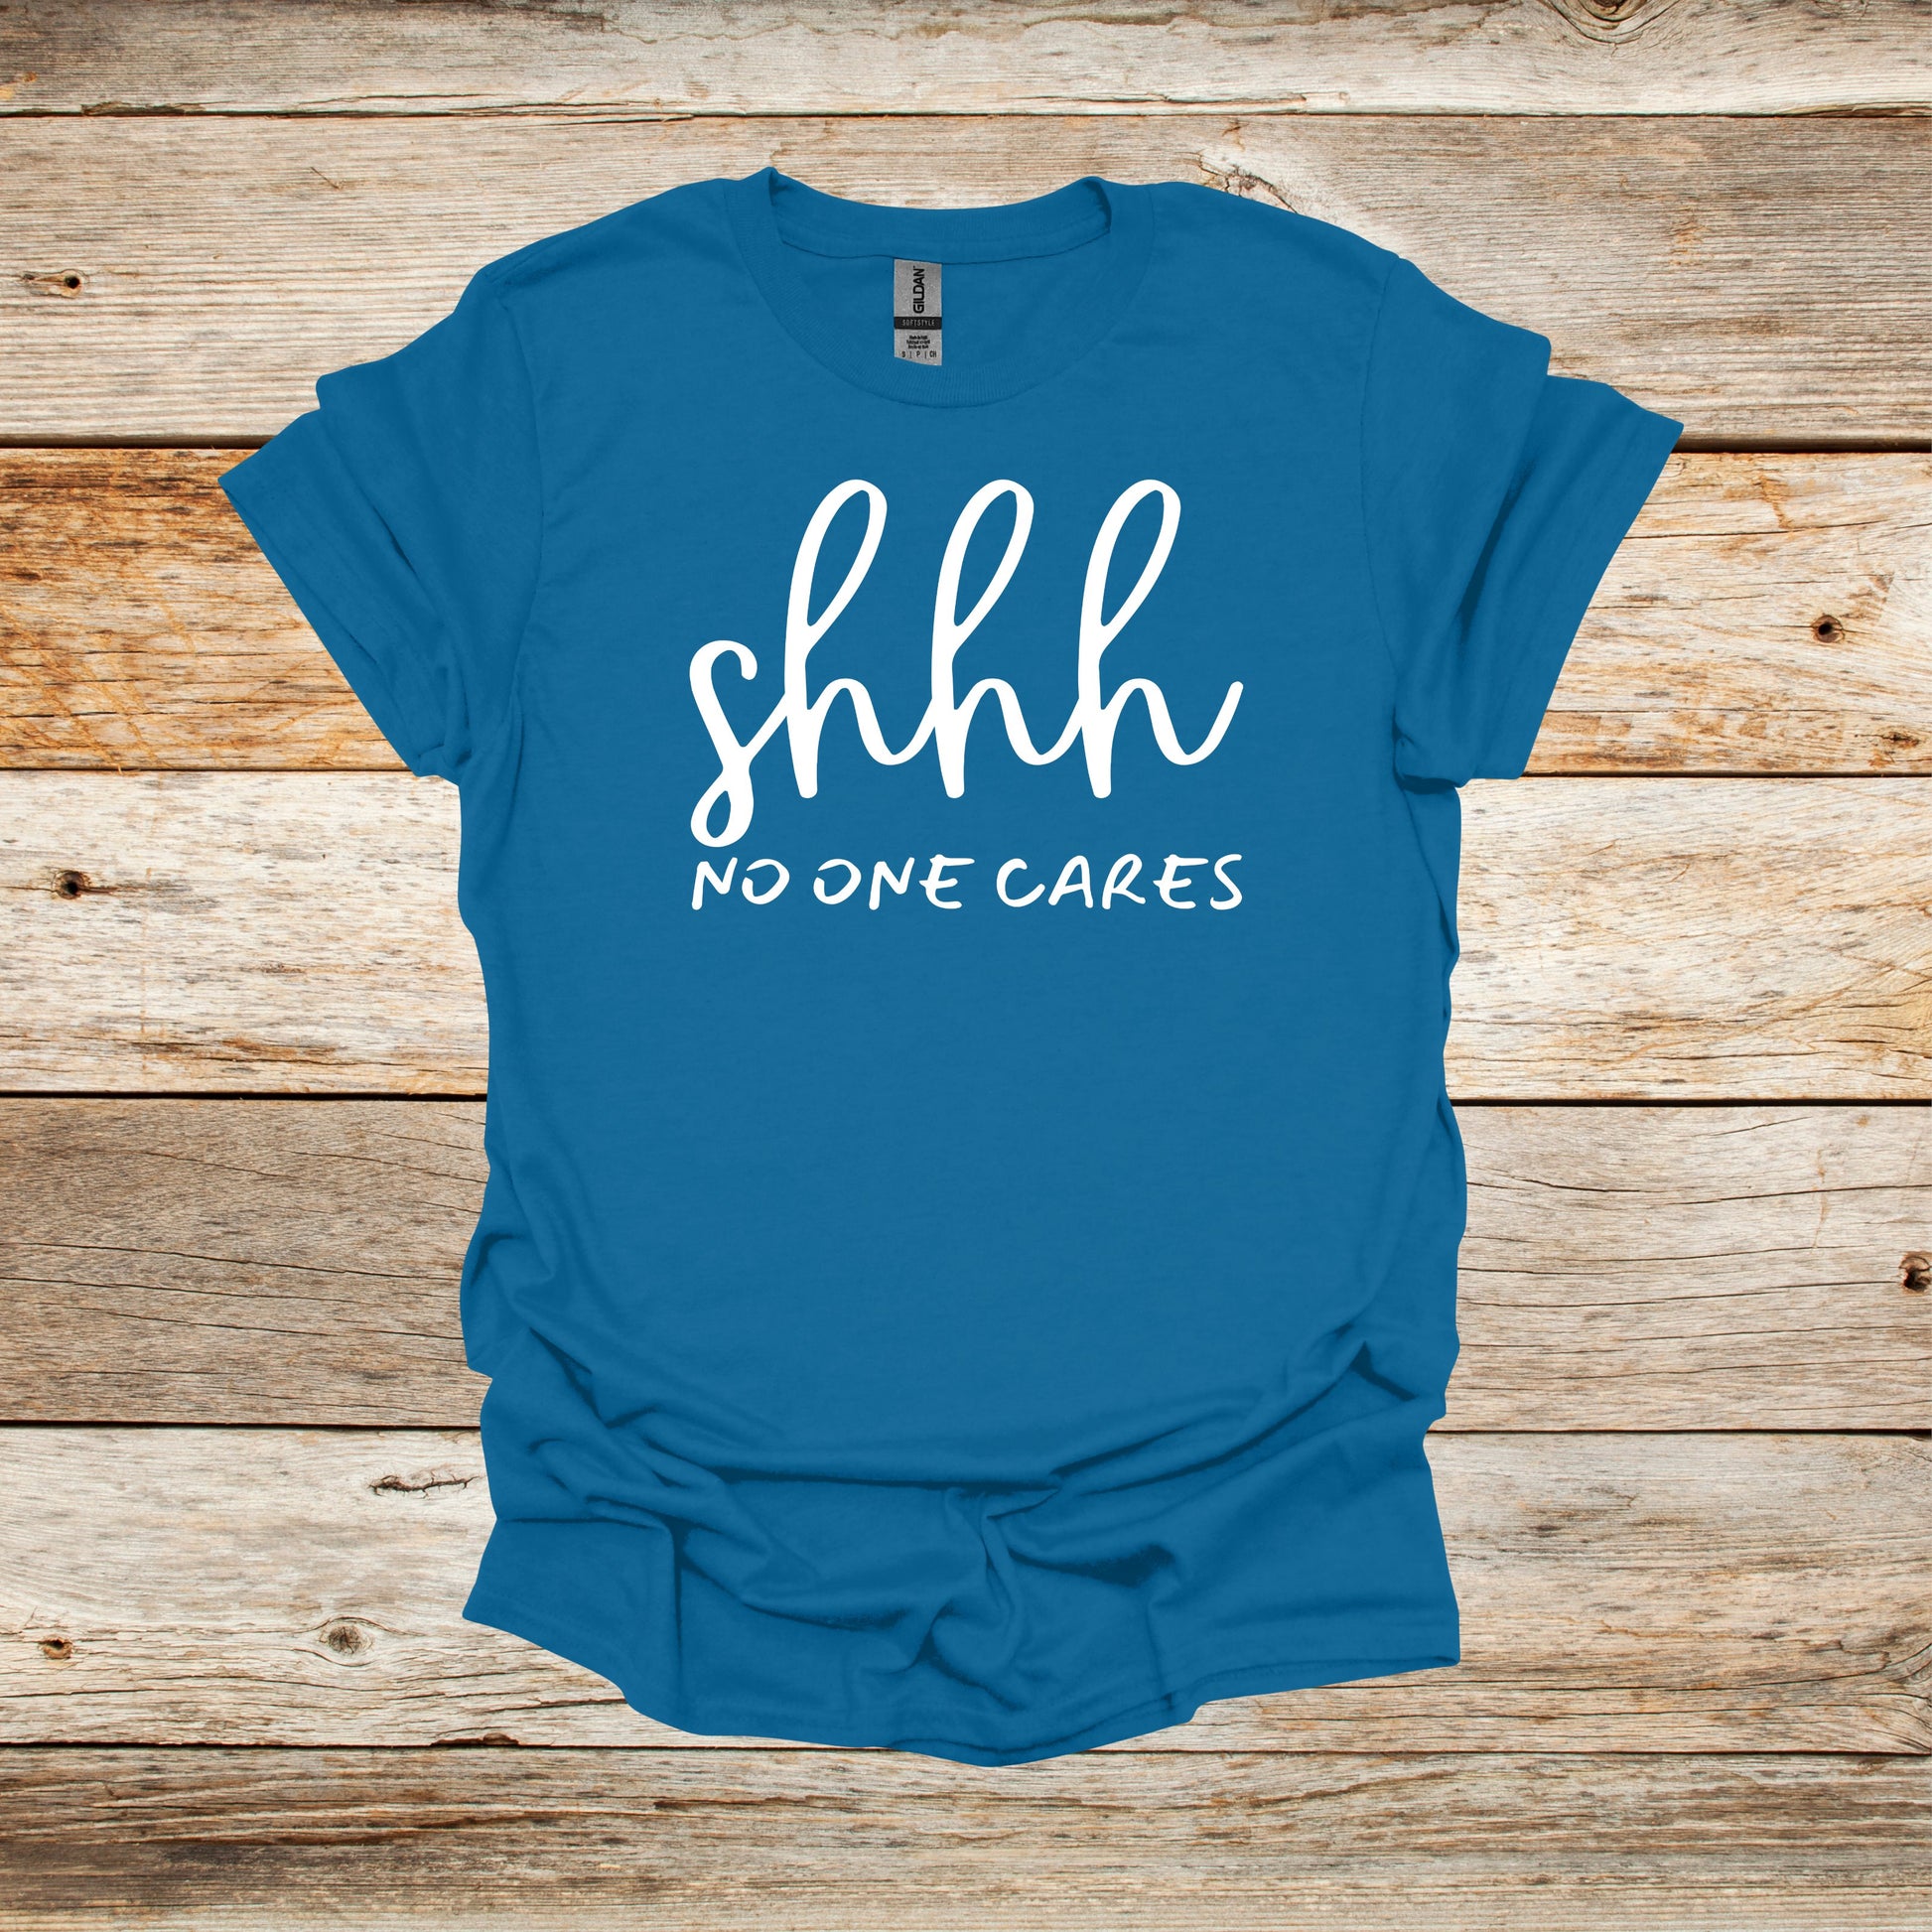 Sayings T-Shirt -Shhh No One Cares - Men's and Women's Tee Shirts - Sayings T-Shirts Graphic Avenue Antique Sapphire Adult Small 